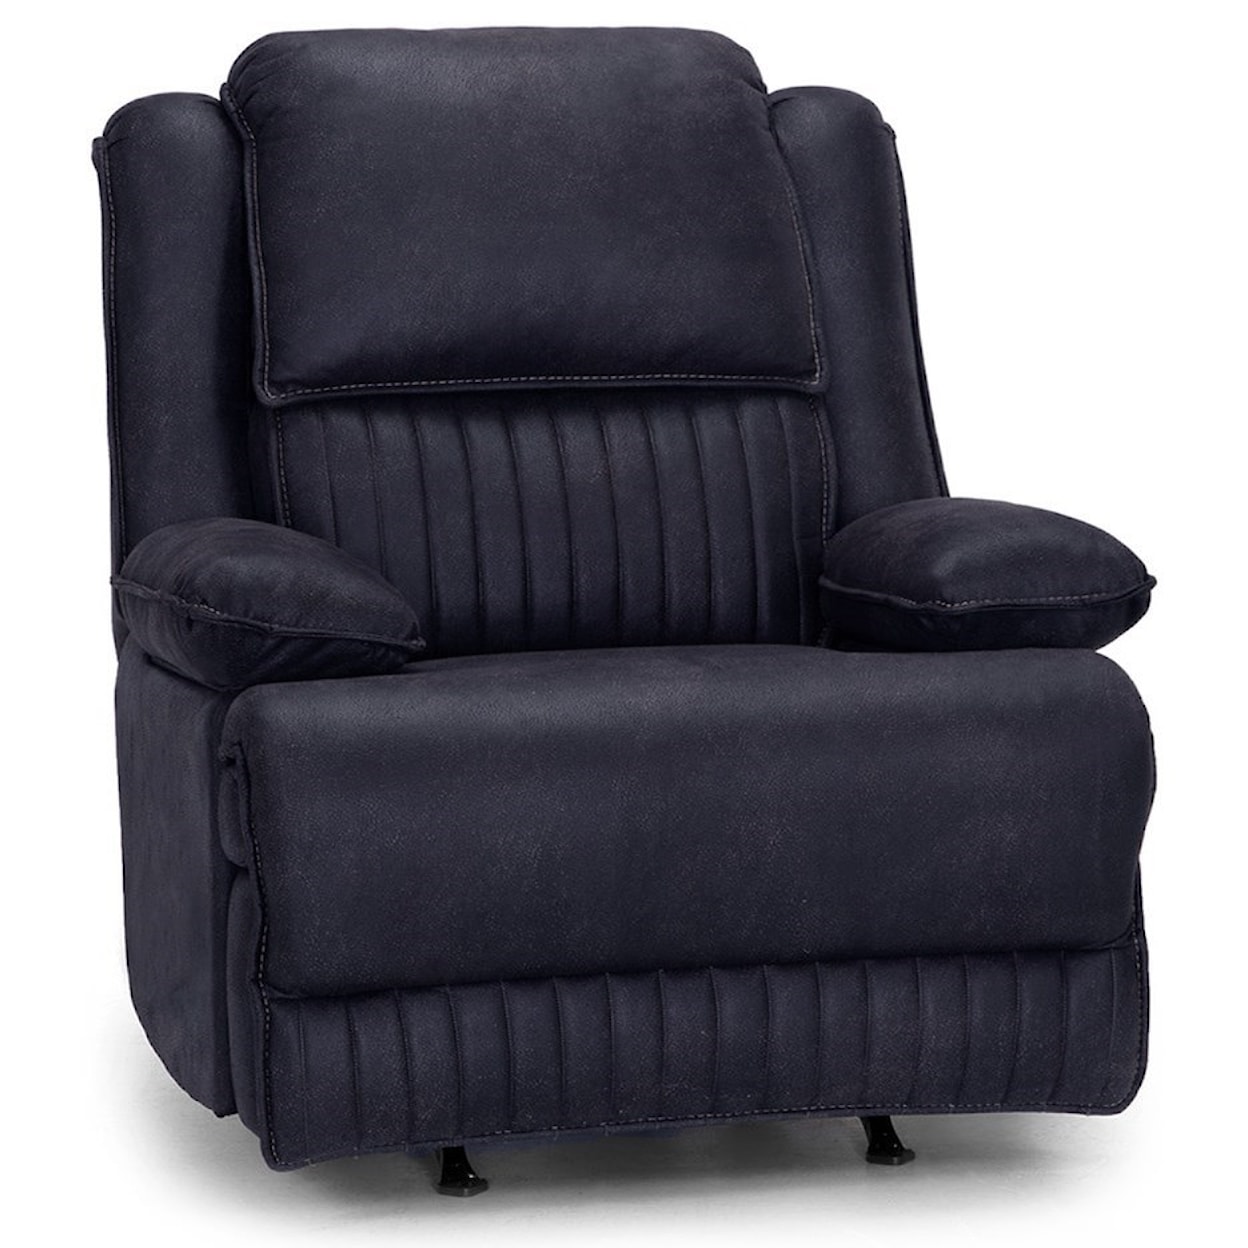 Franklin 4578 Power Rocker Recliner with Dual Storage Arms